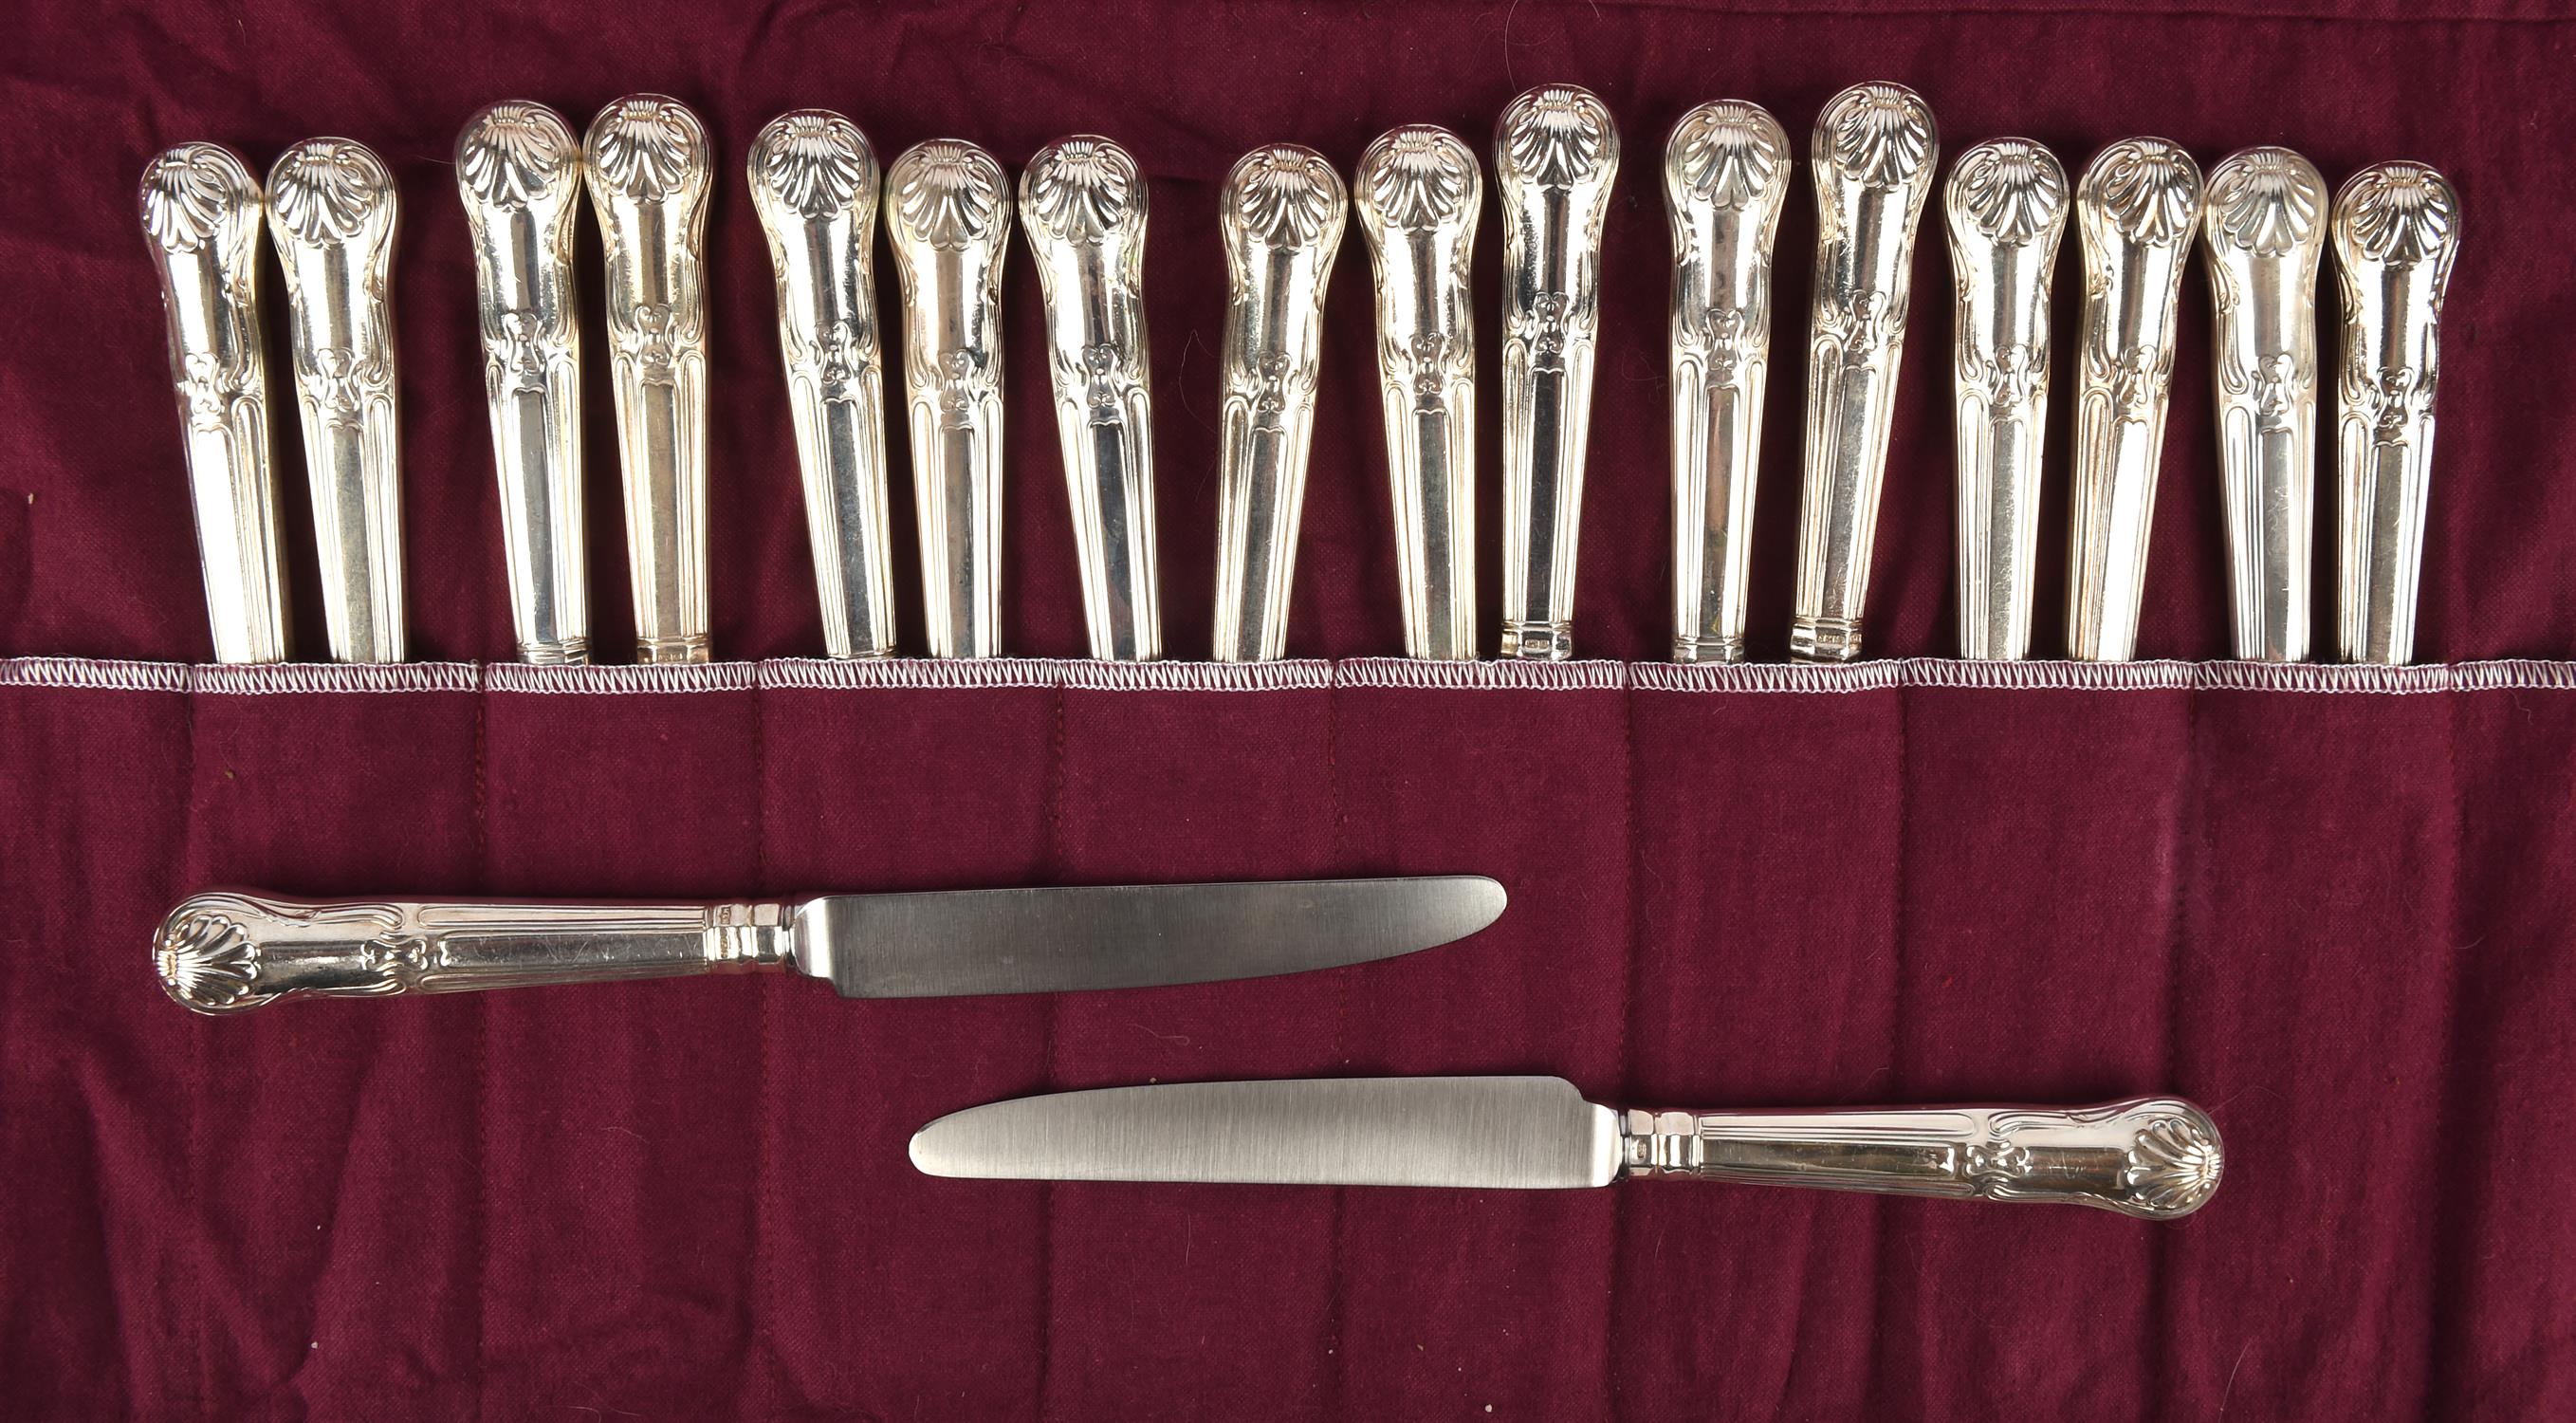 18 silver handled table knives and 18 side knives with stainless steel blades by Mappin & Webb